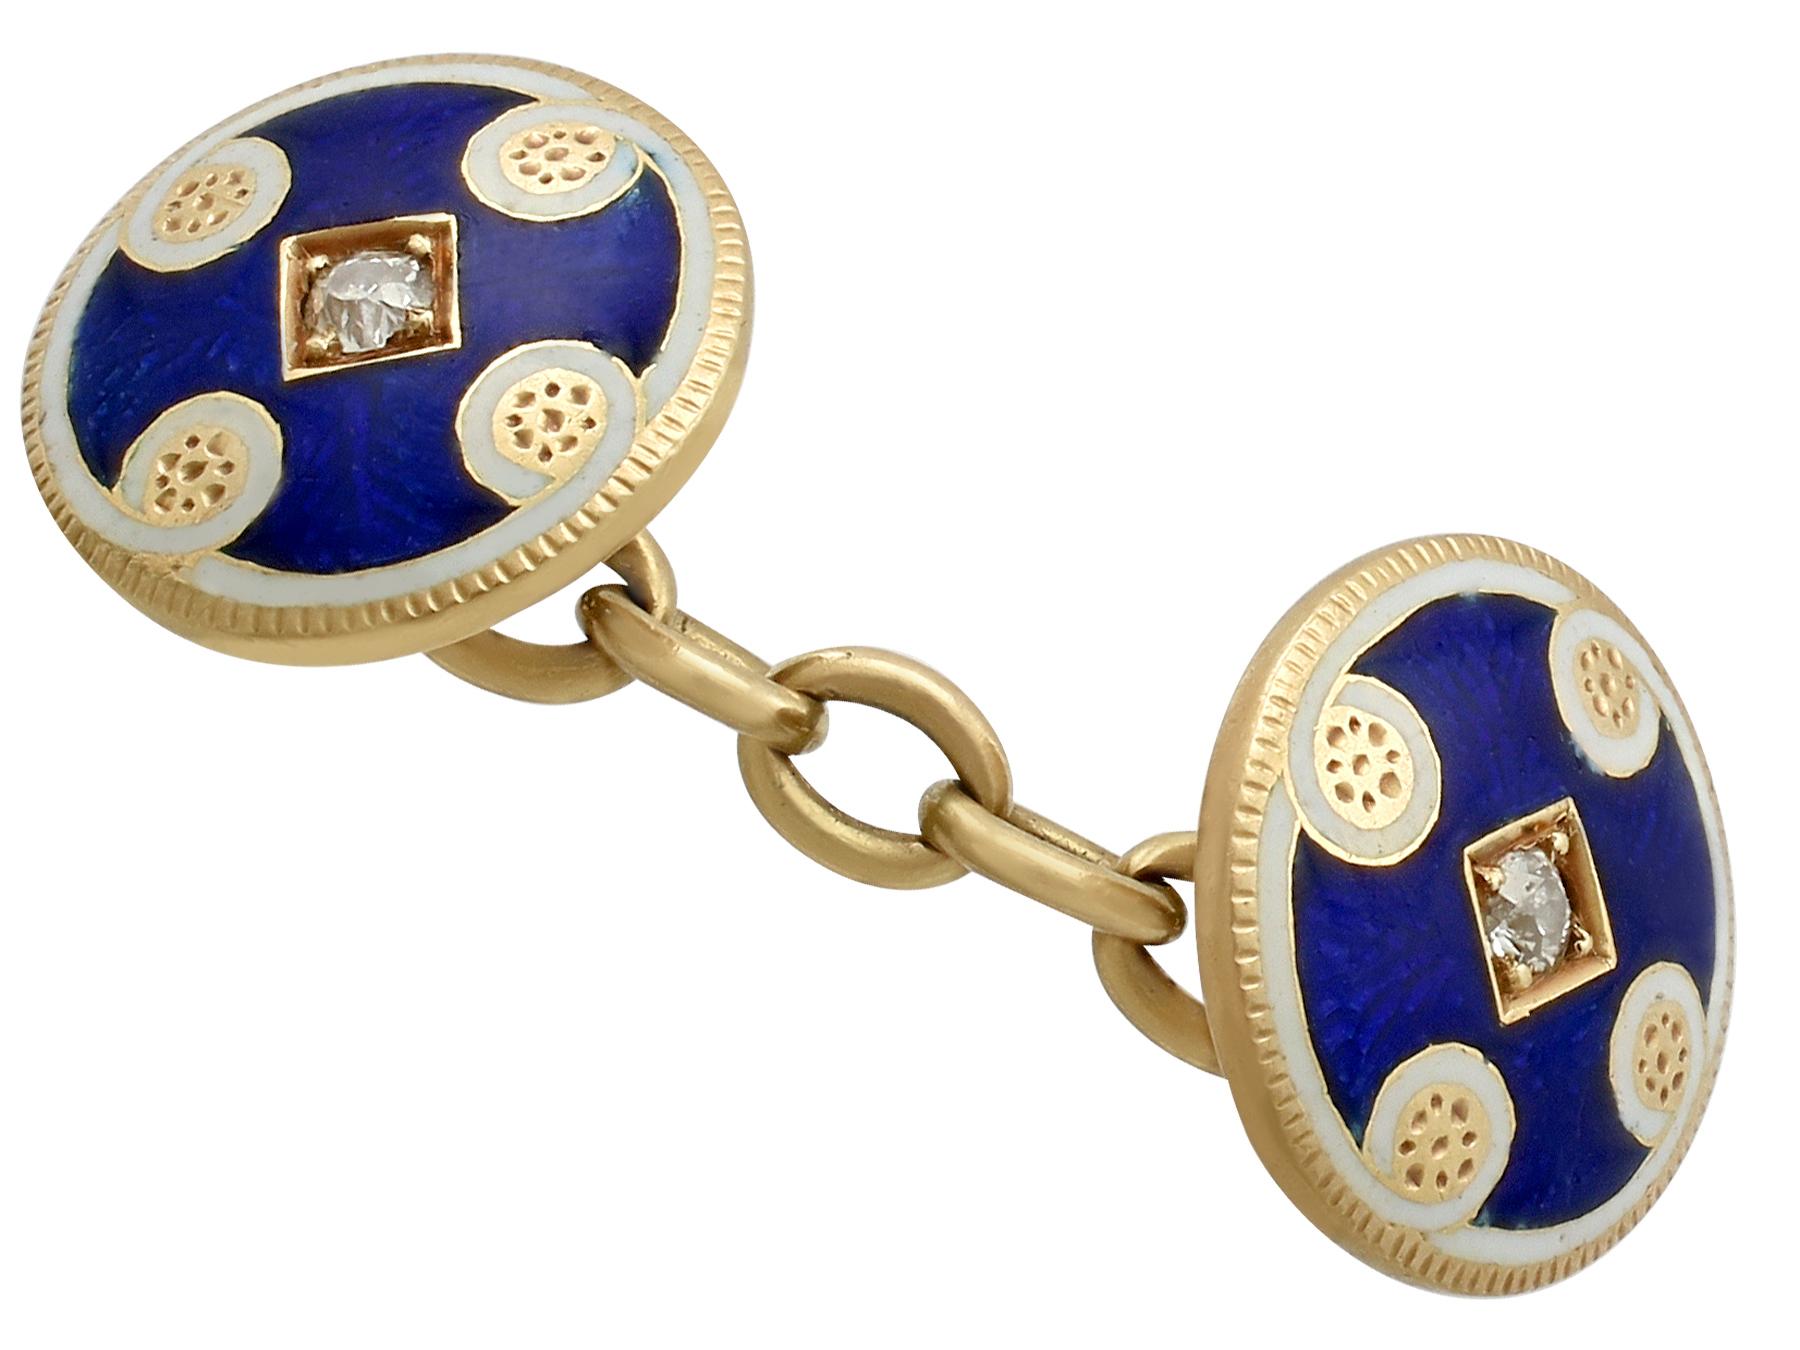 An impressive pair of antique Victorian 0.24 carat diamond and enamel, 18 karat yellow gold cufflinks; part of our diverse antique jewelry and estate jewelry collections.

These fine and impressive antique cufflinks have been crafted in 18k yellow